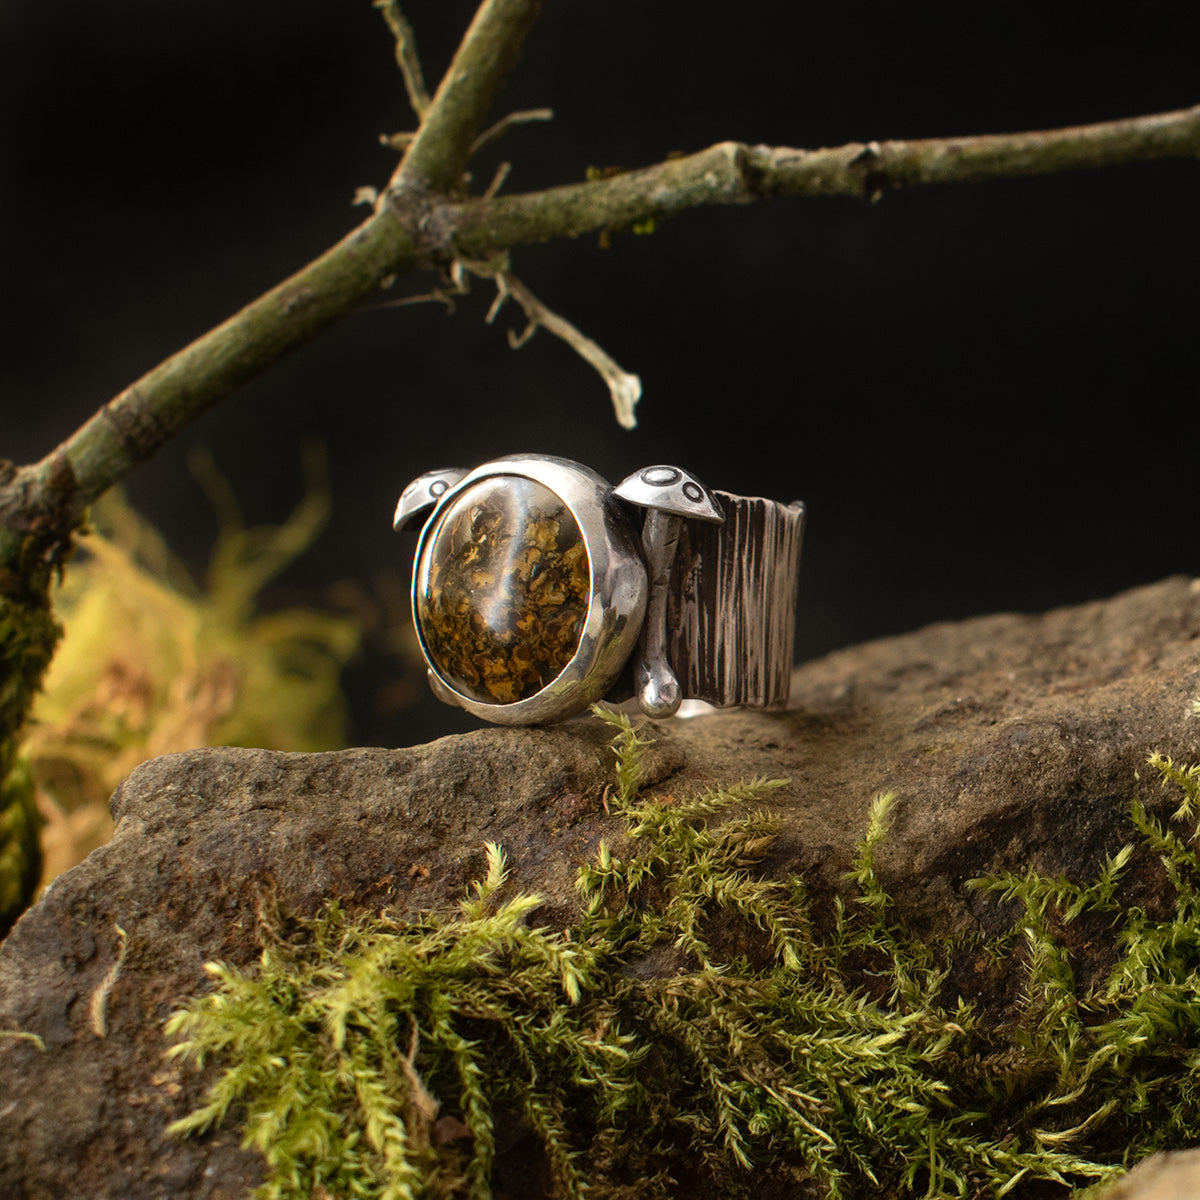 A three-quarter view of the Real Lichen Double Toadstool Ring shows its miniature Amanita mushrooms, each sculpted by hand from sterling silver.